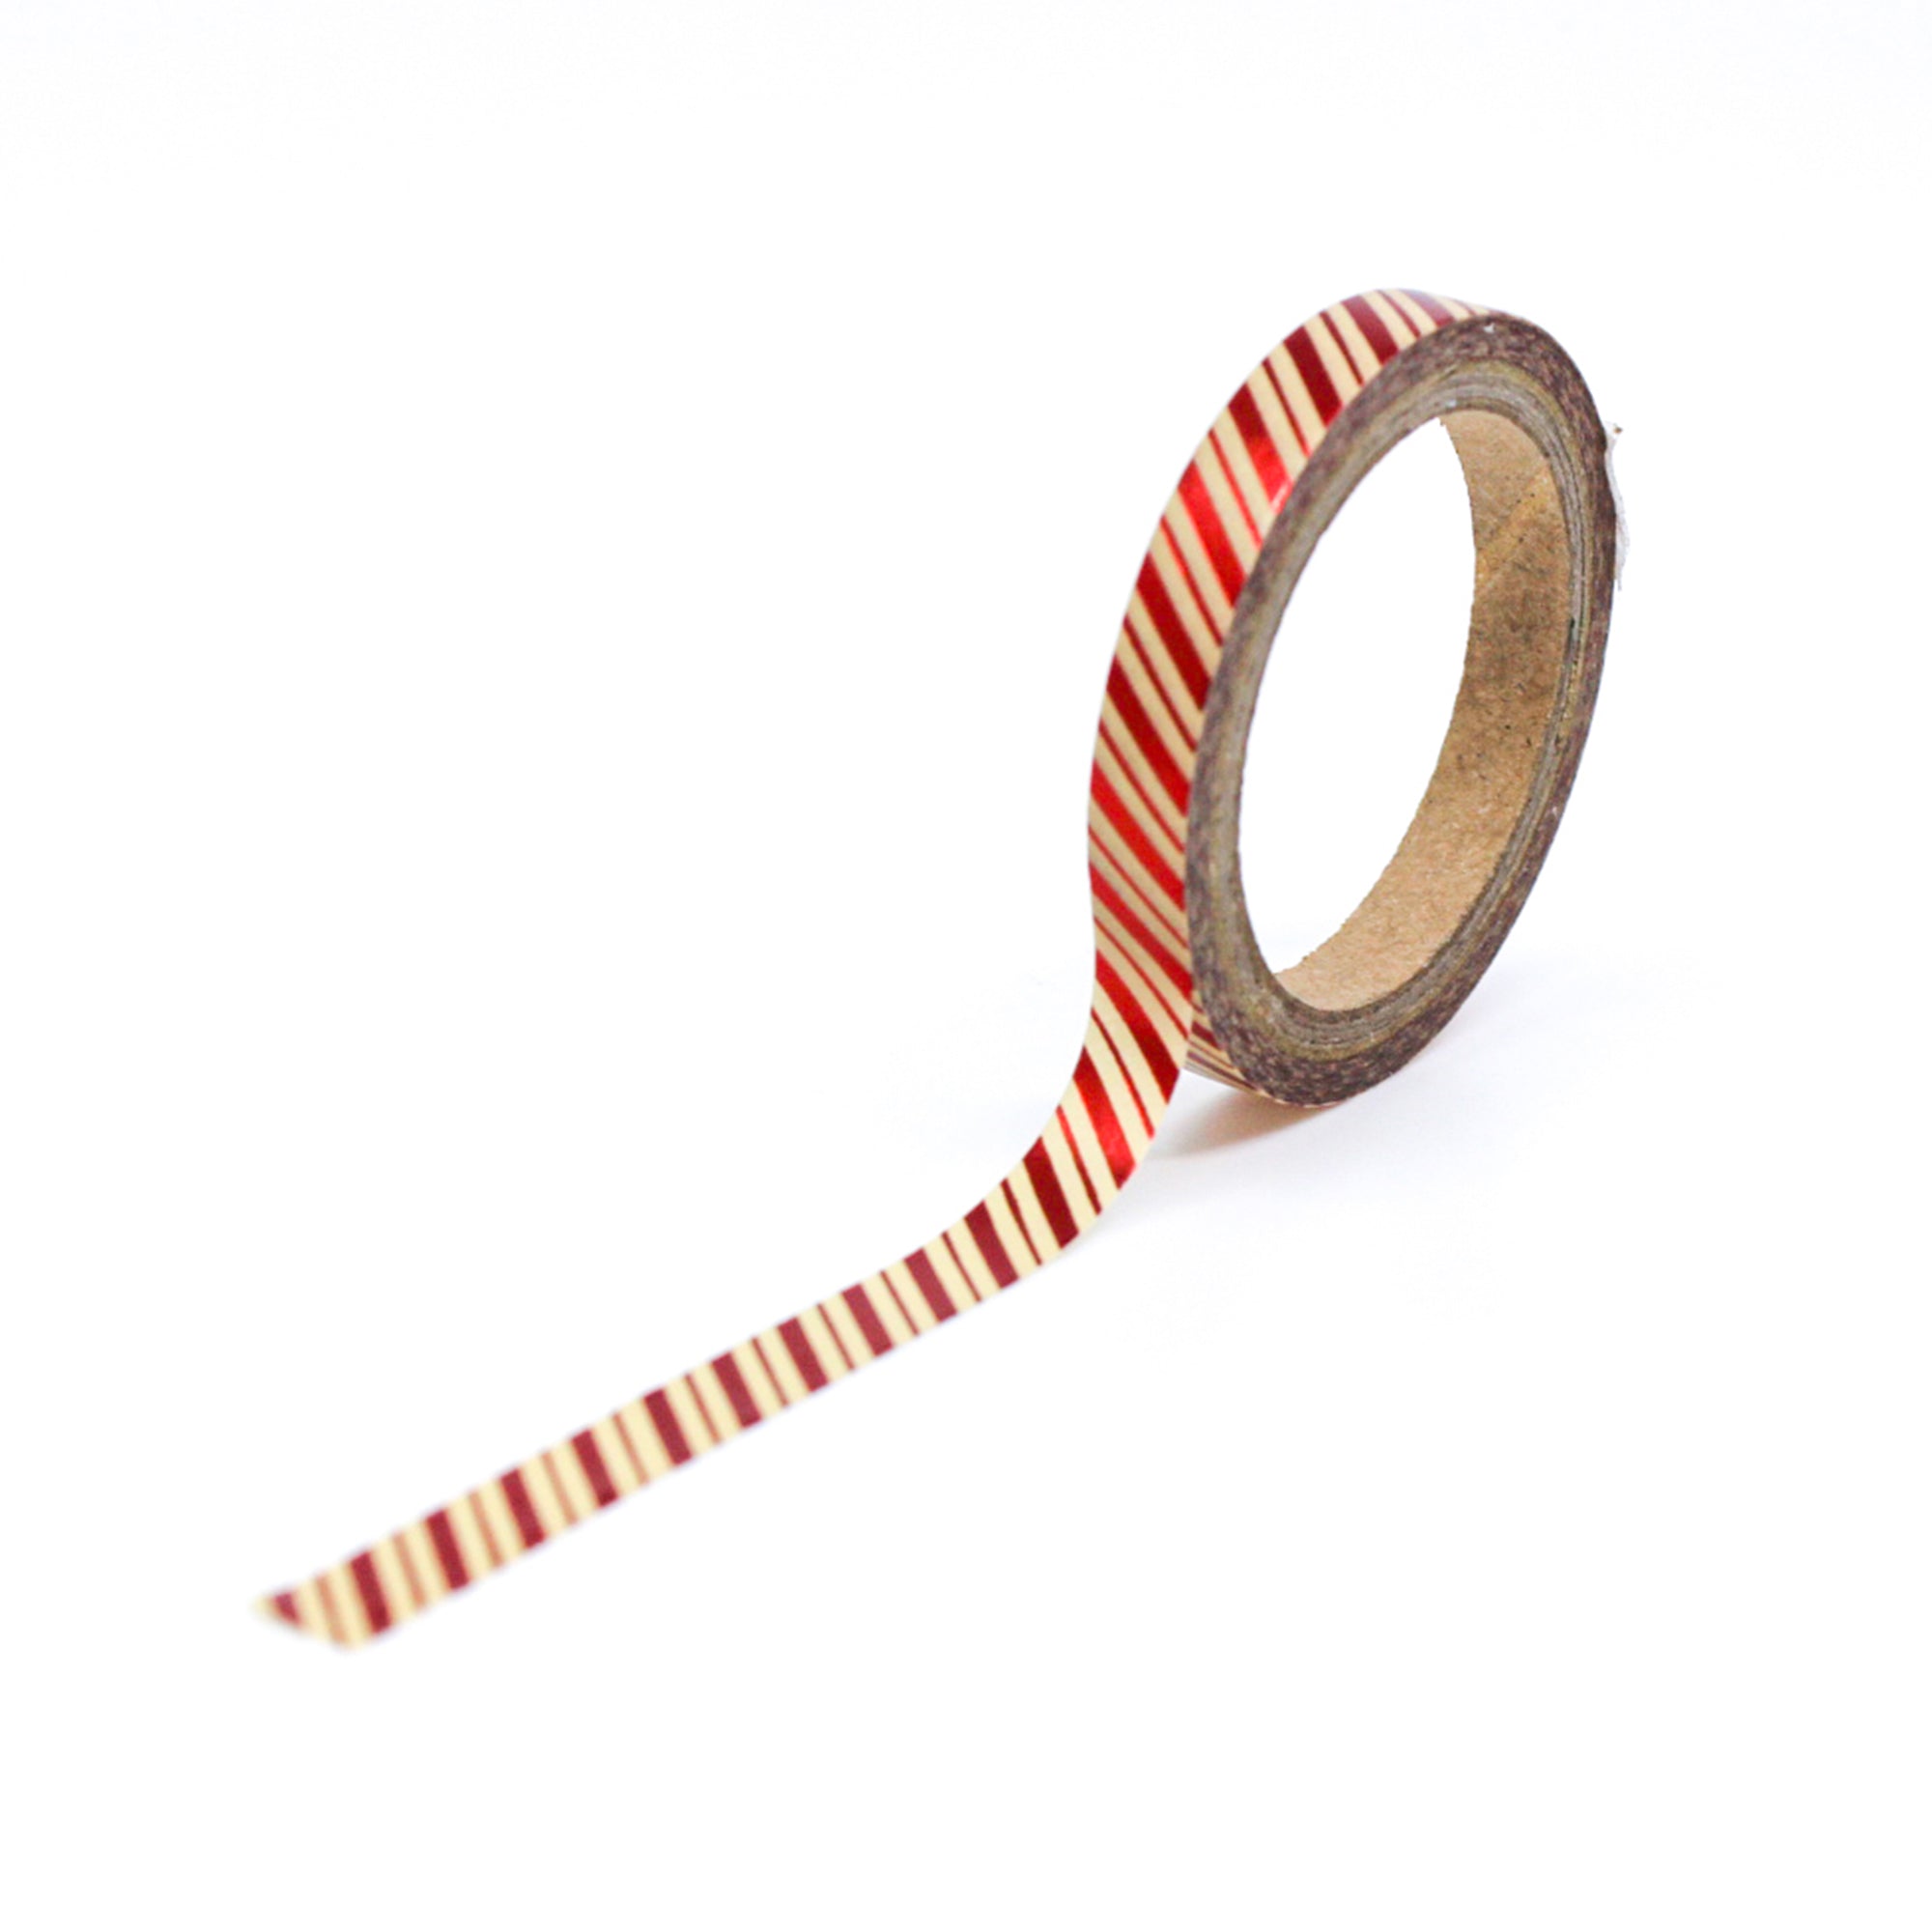 Infuse your creations with the spirit of vintage Christmas using our Washi tape adorned with classic candy cane stripes, capturing the warmth and nostalgia of holiday traditions. This tape is sold at BBB Supplies Craft Shop.